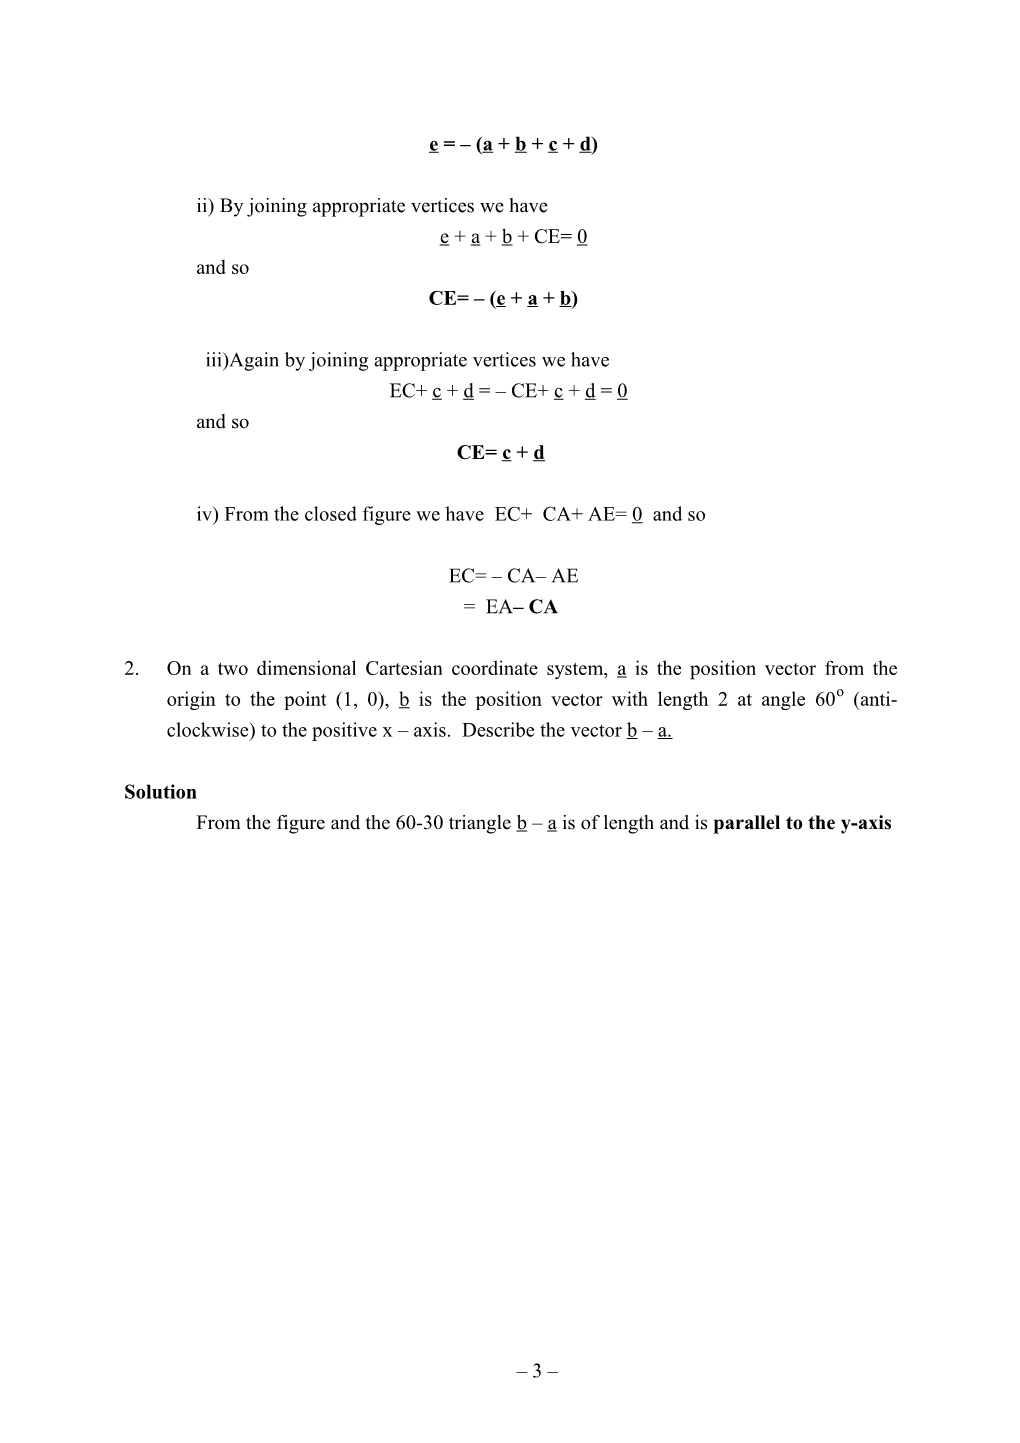 Chapter 11 Solutions to Exercises in Vectors